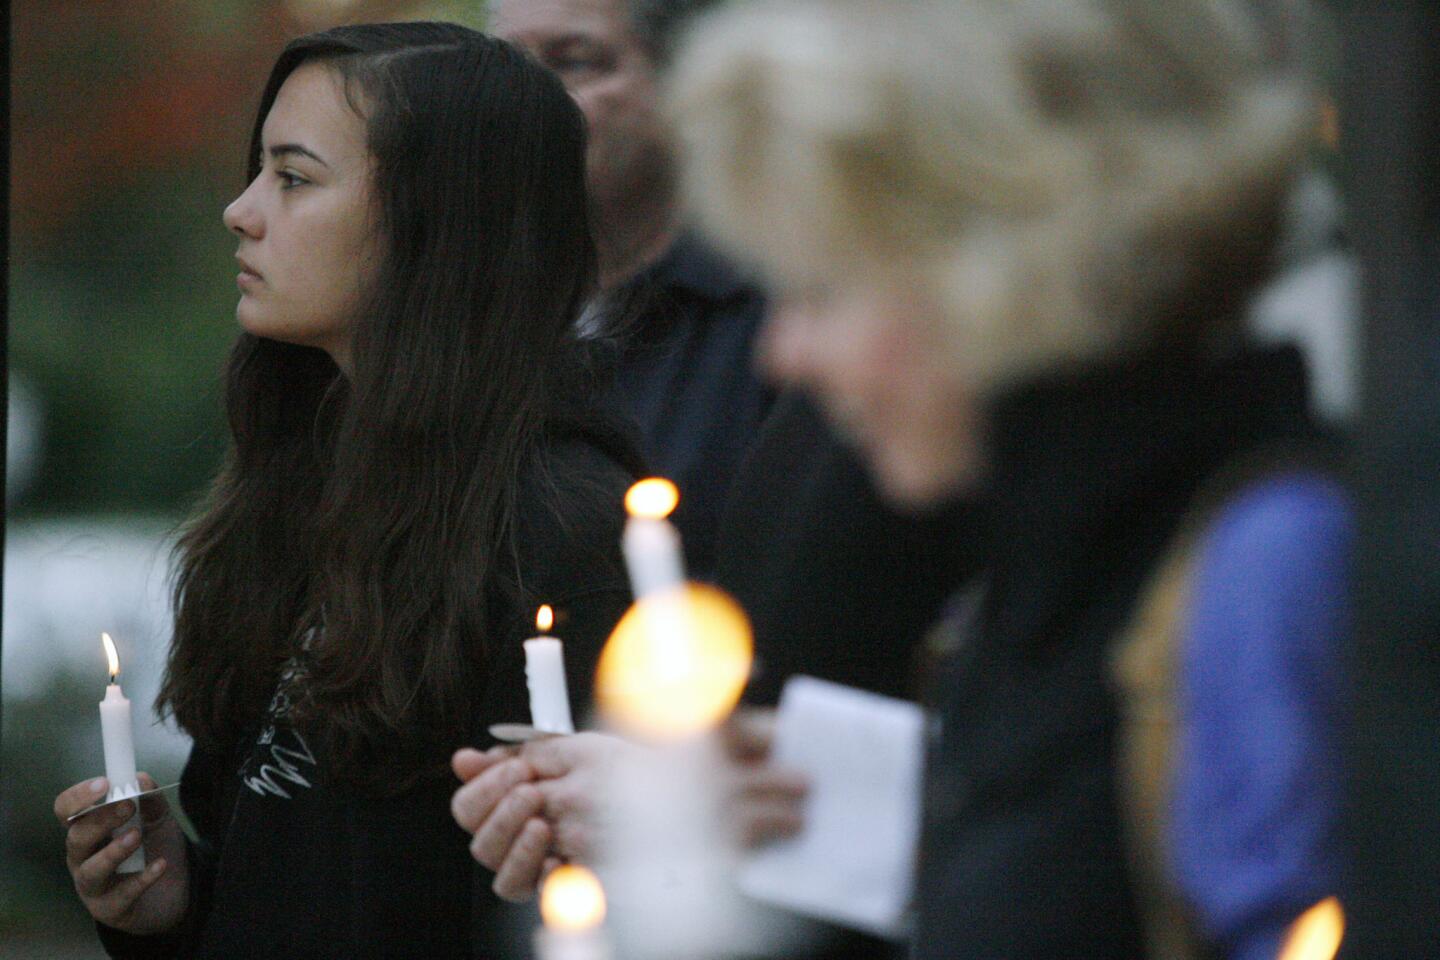 St. George's Episcopal candlelight vigil for Newton, Ct. shooting